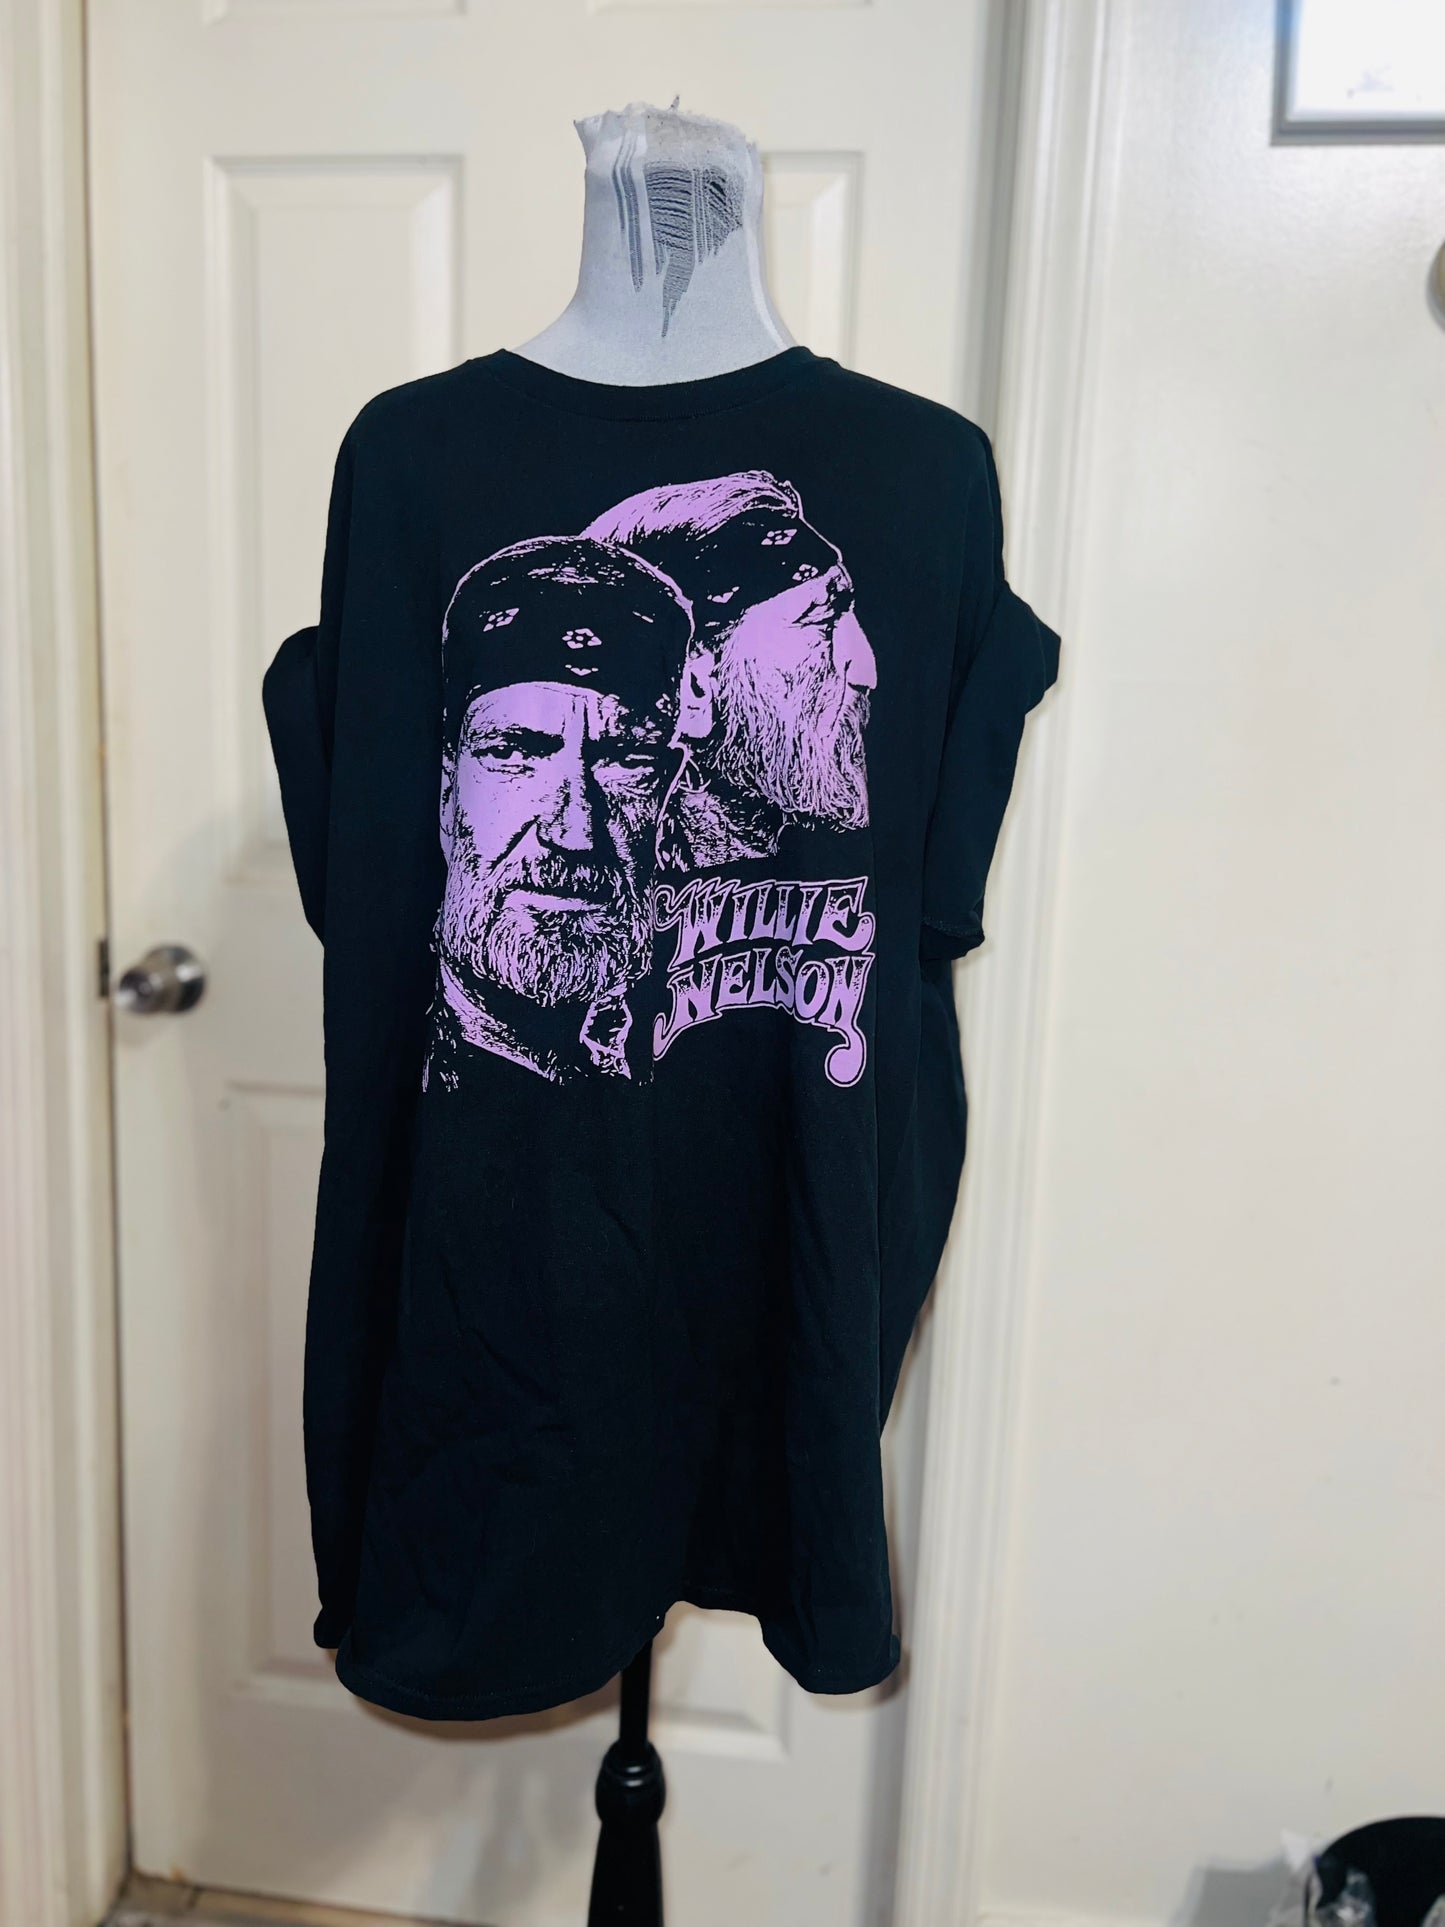 Willie Nelson Oversized Distressed Tee